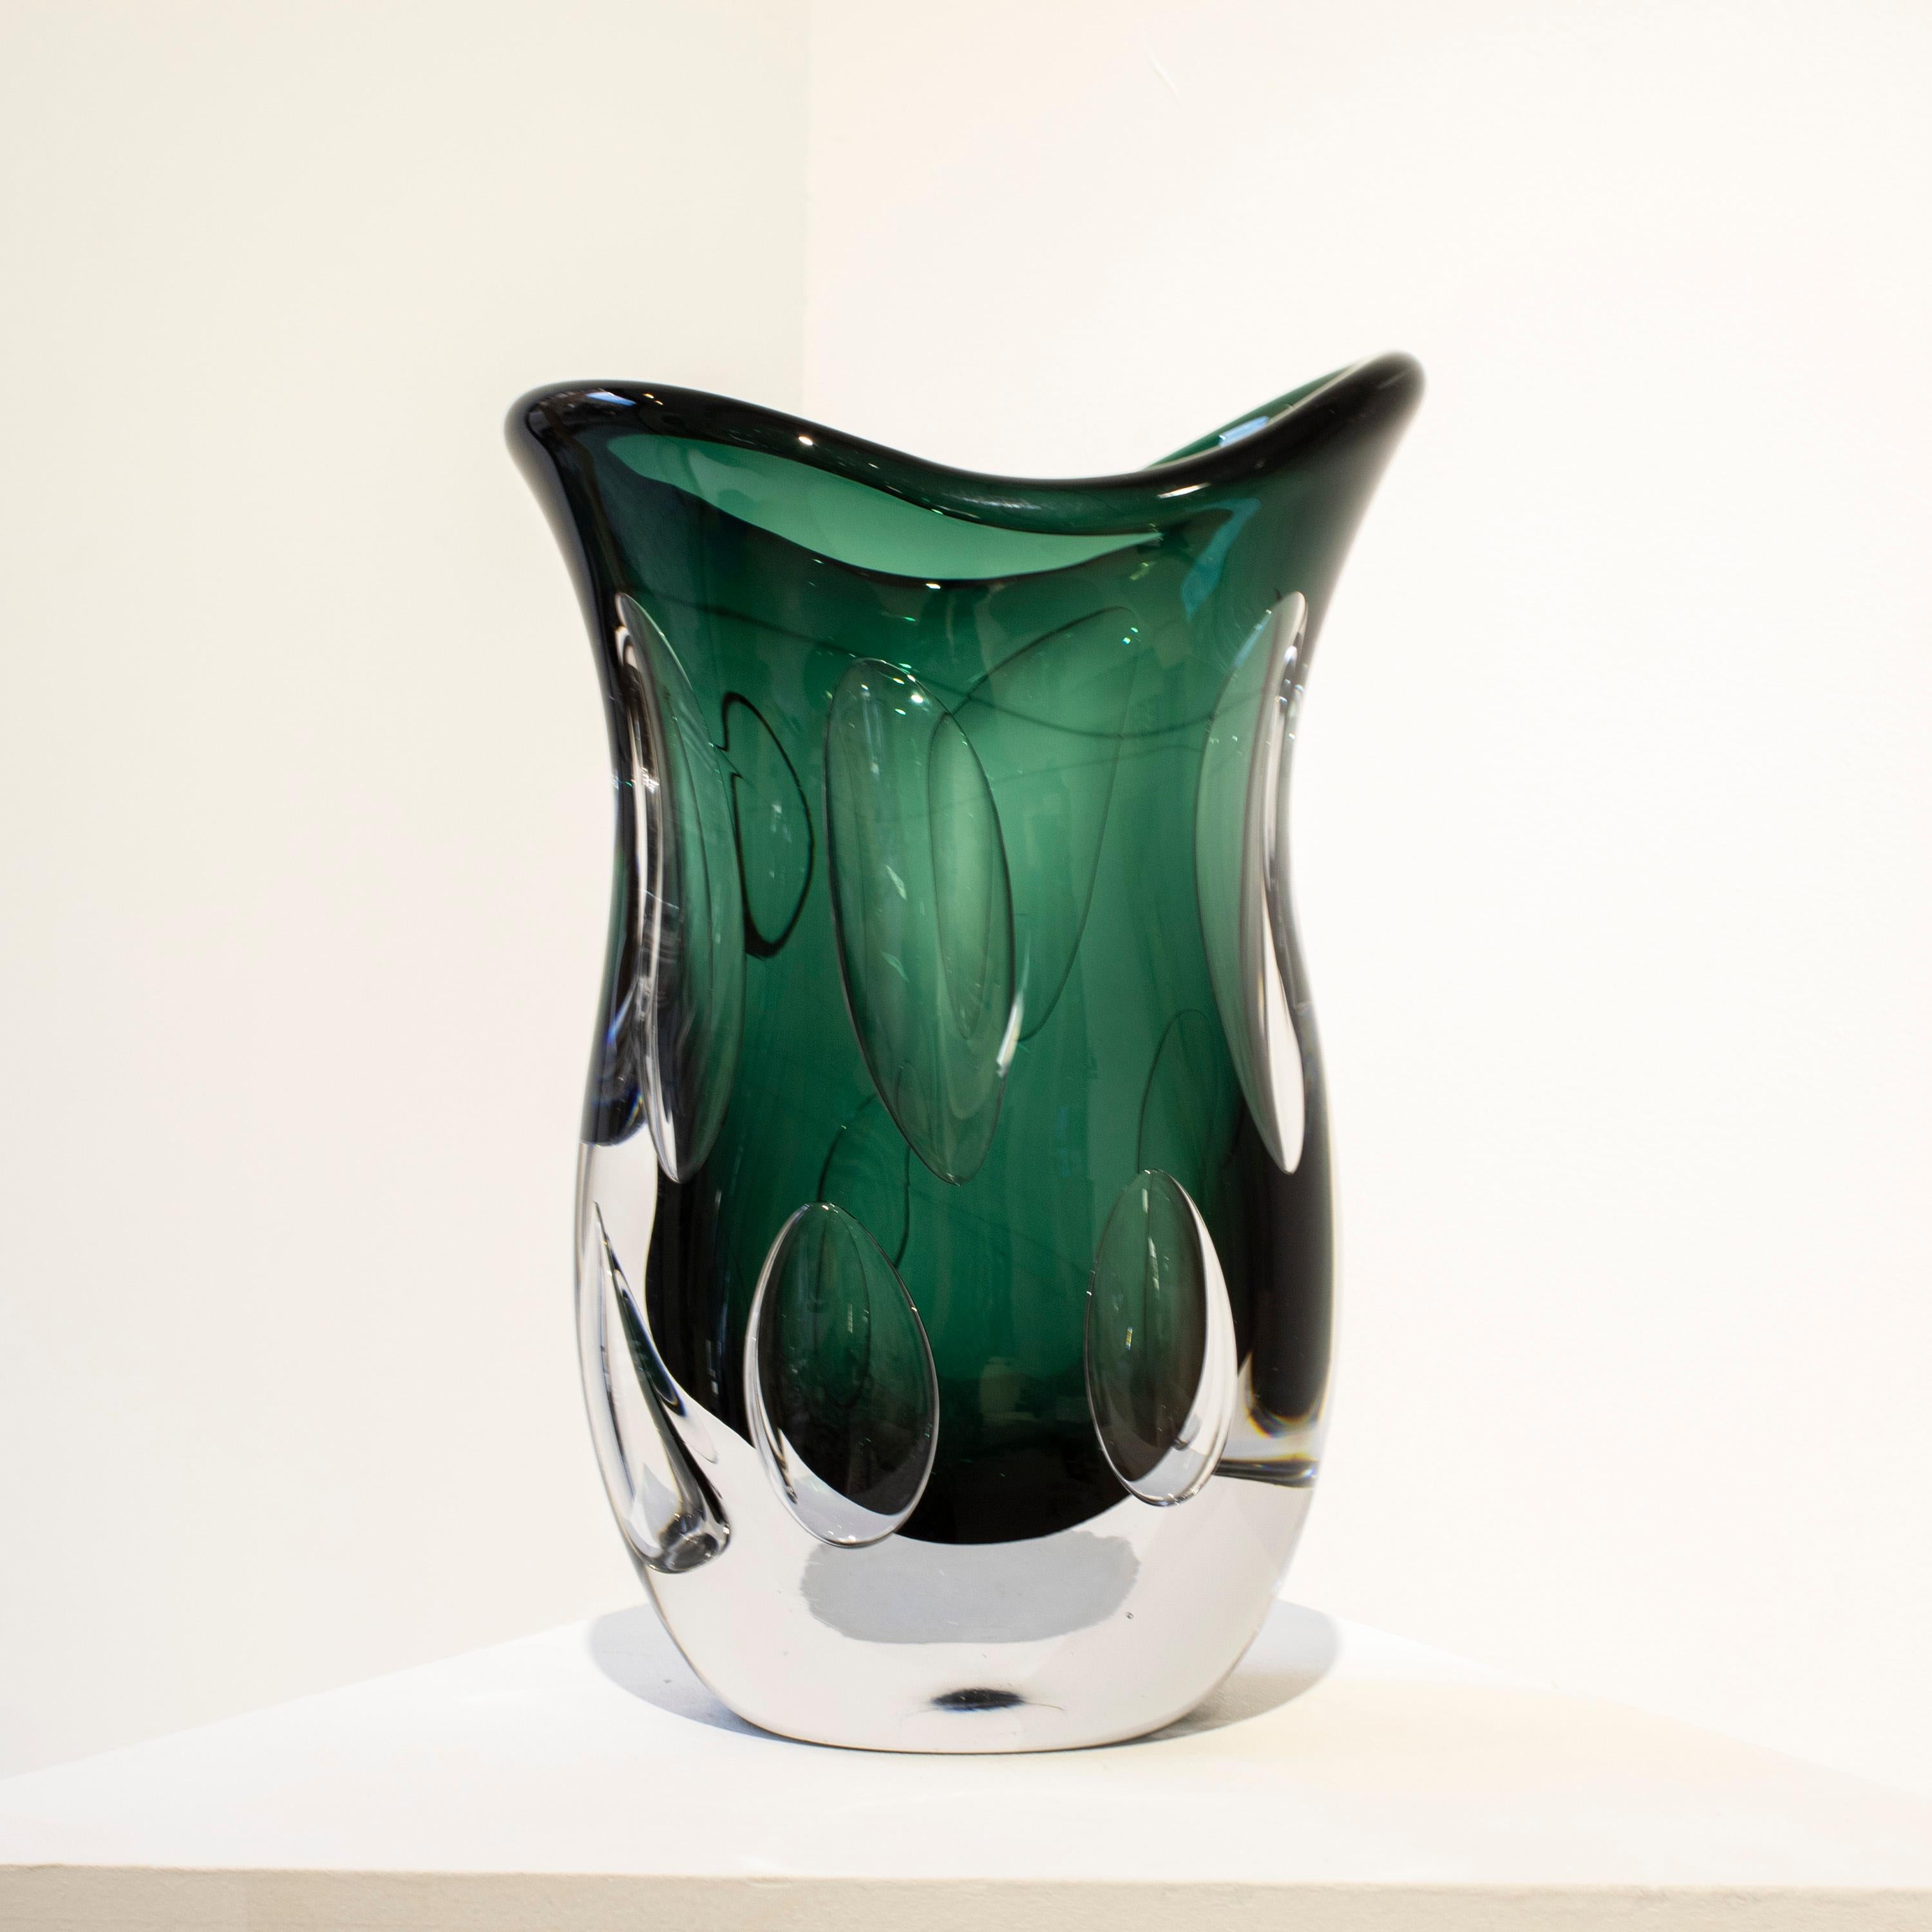 Hand-blown Italian green semi-transparent glass vase with organic shapes and inside bubbles.